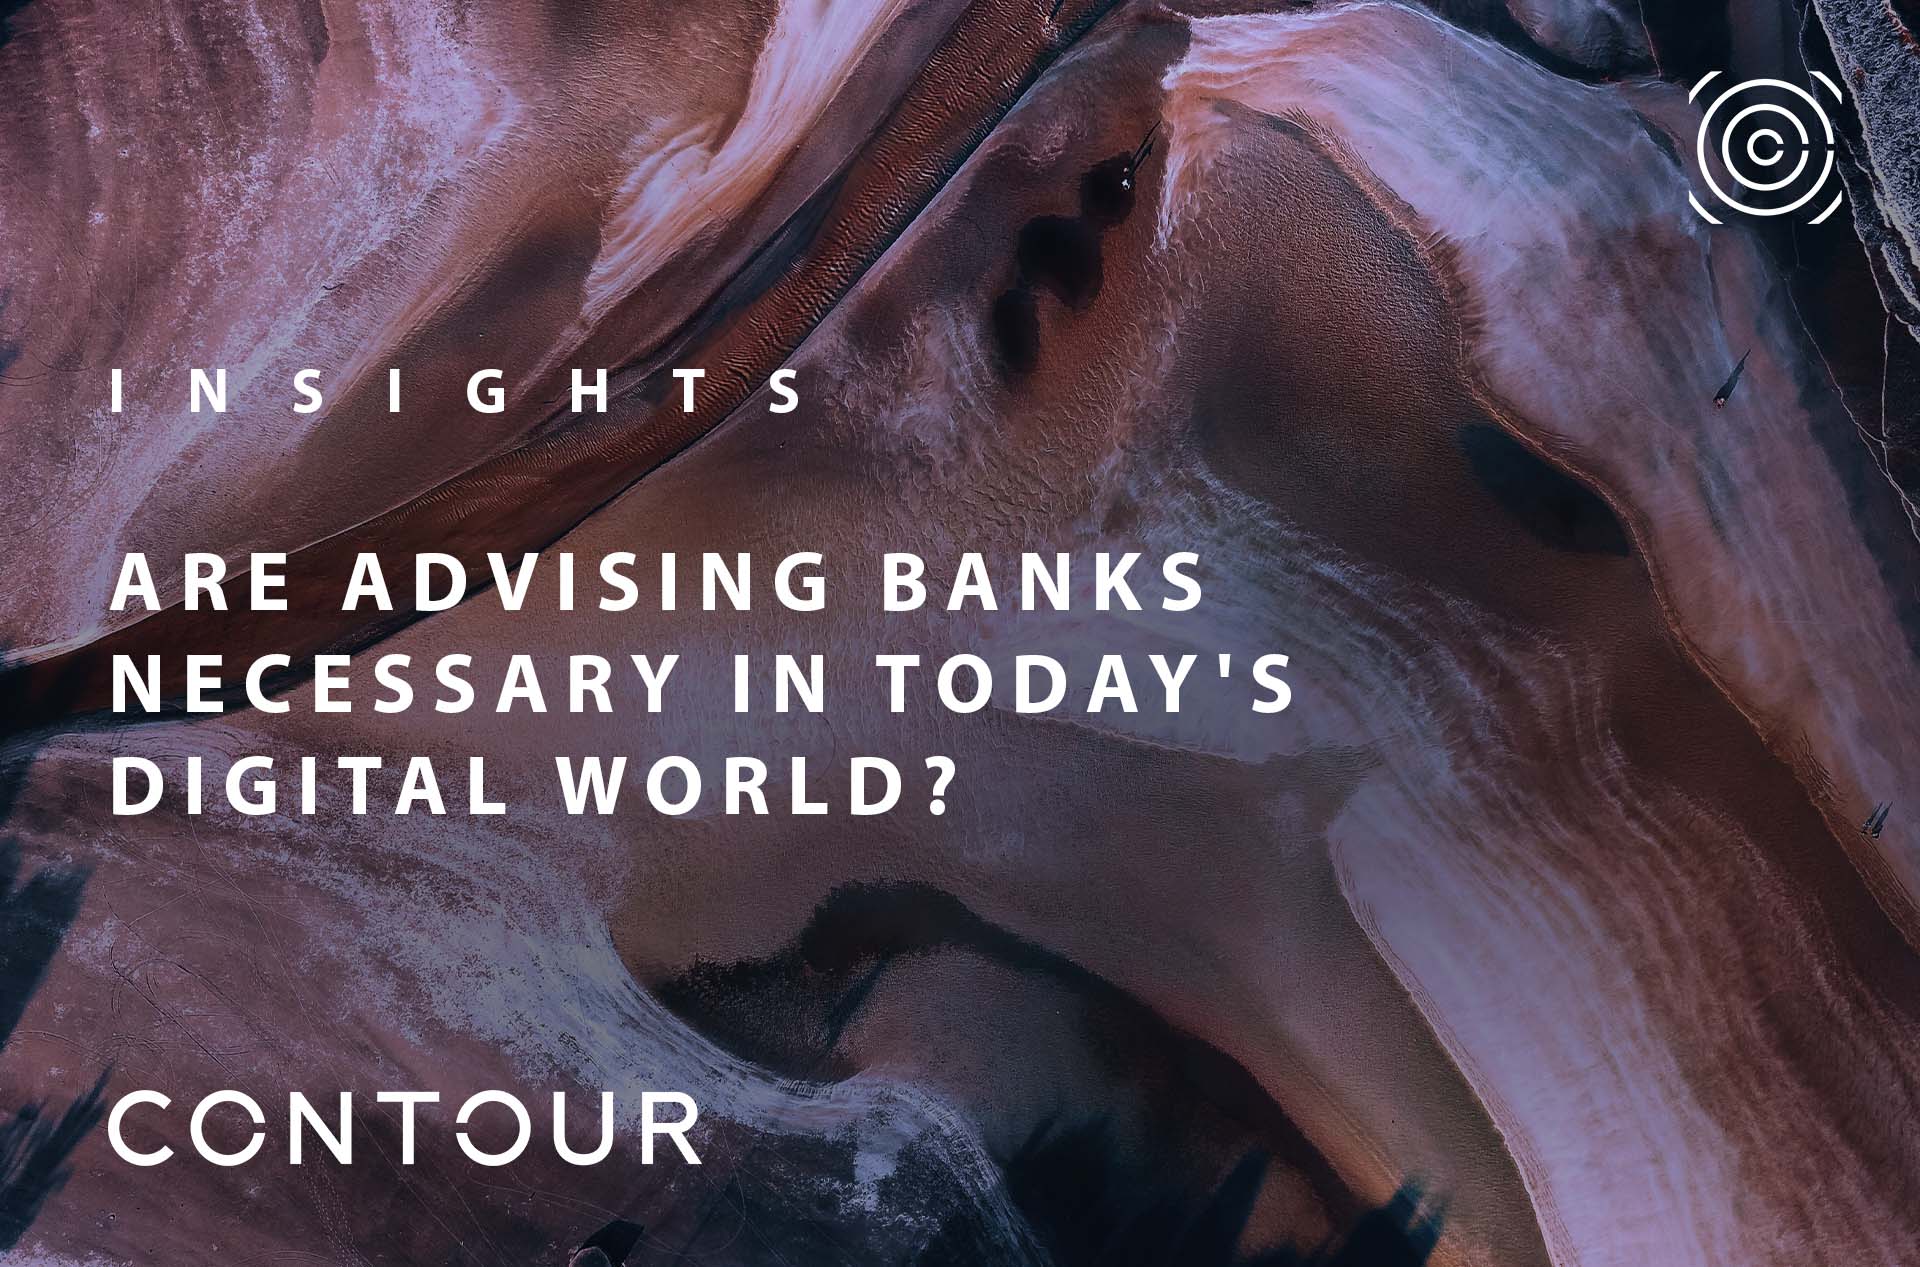 Are advising banks necessary in today's digital world?